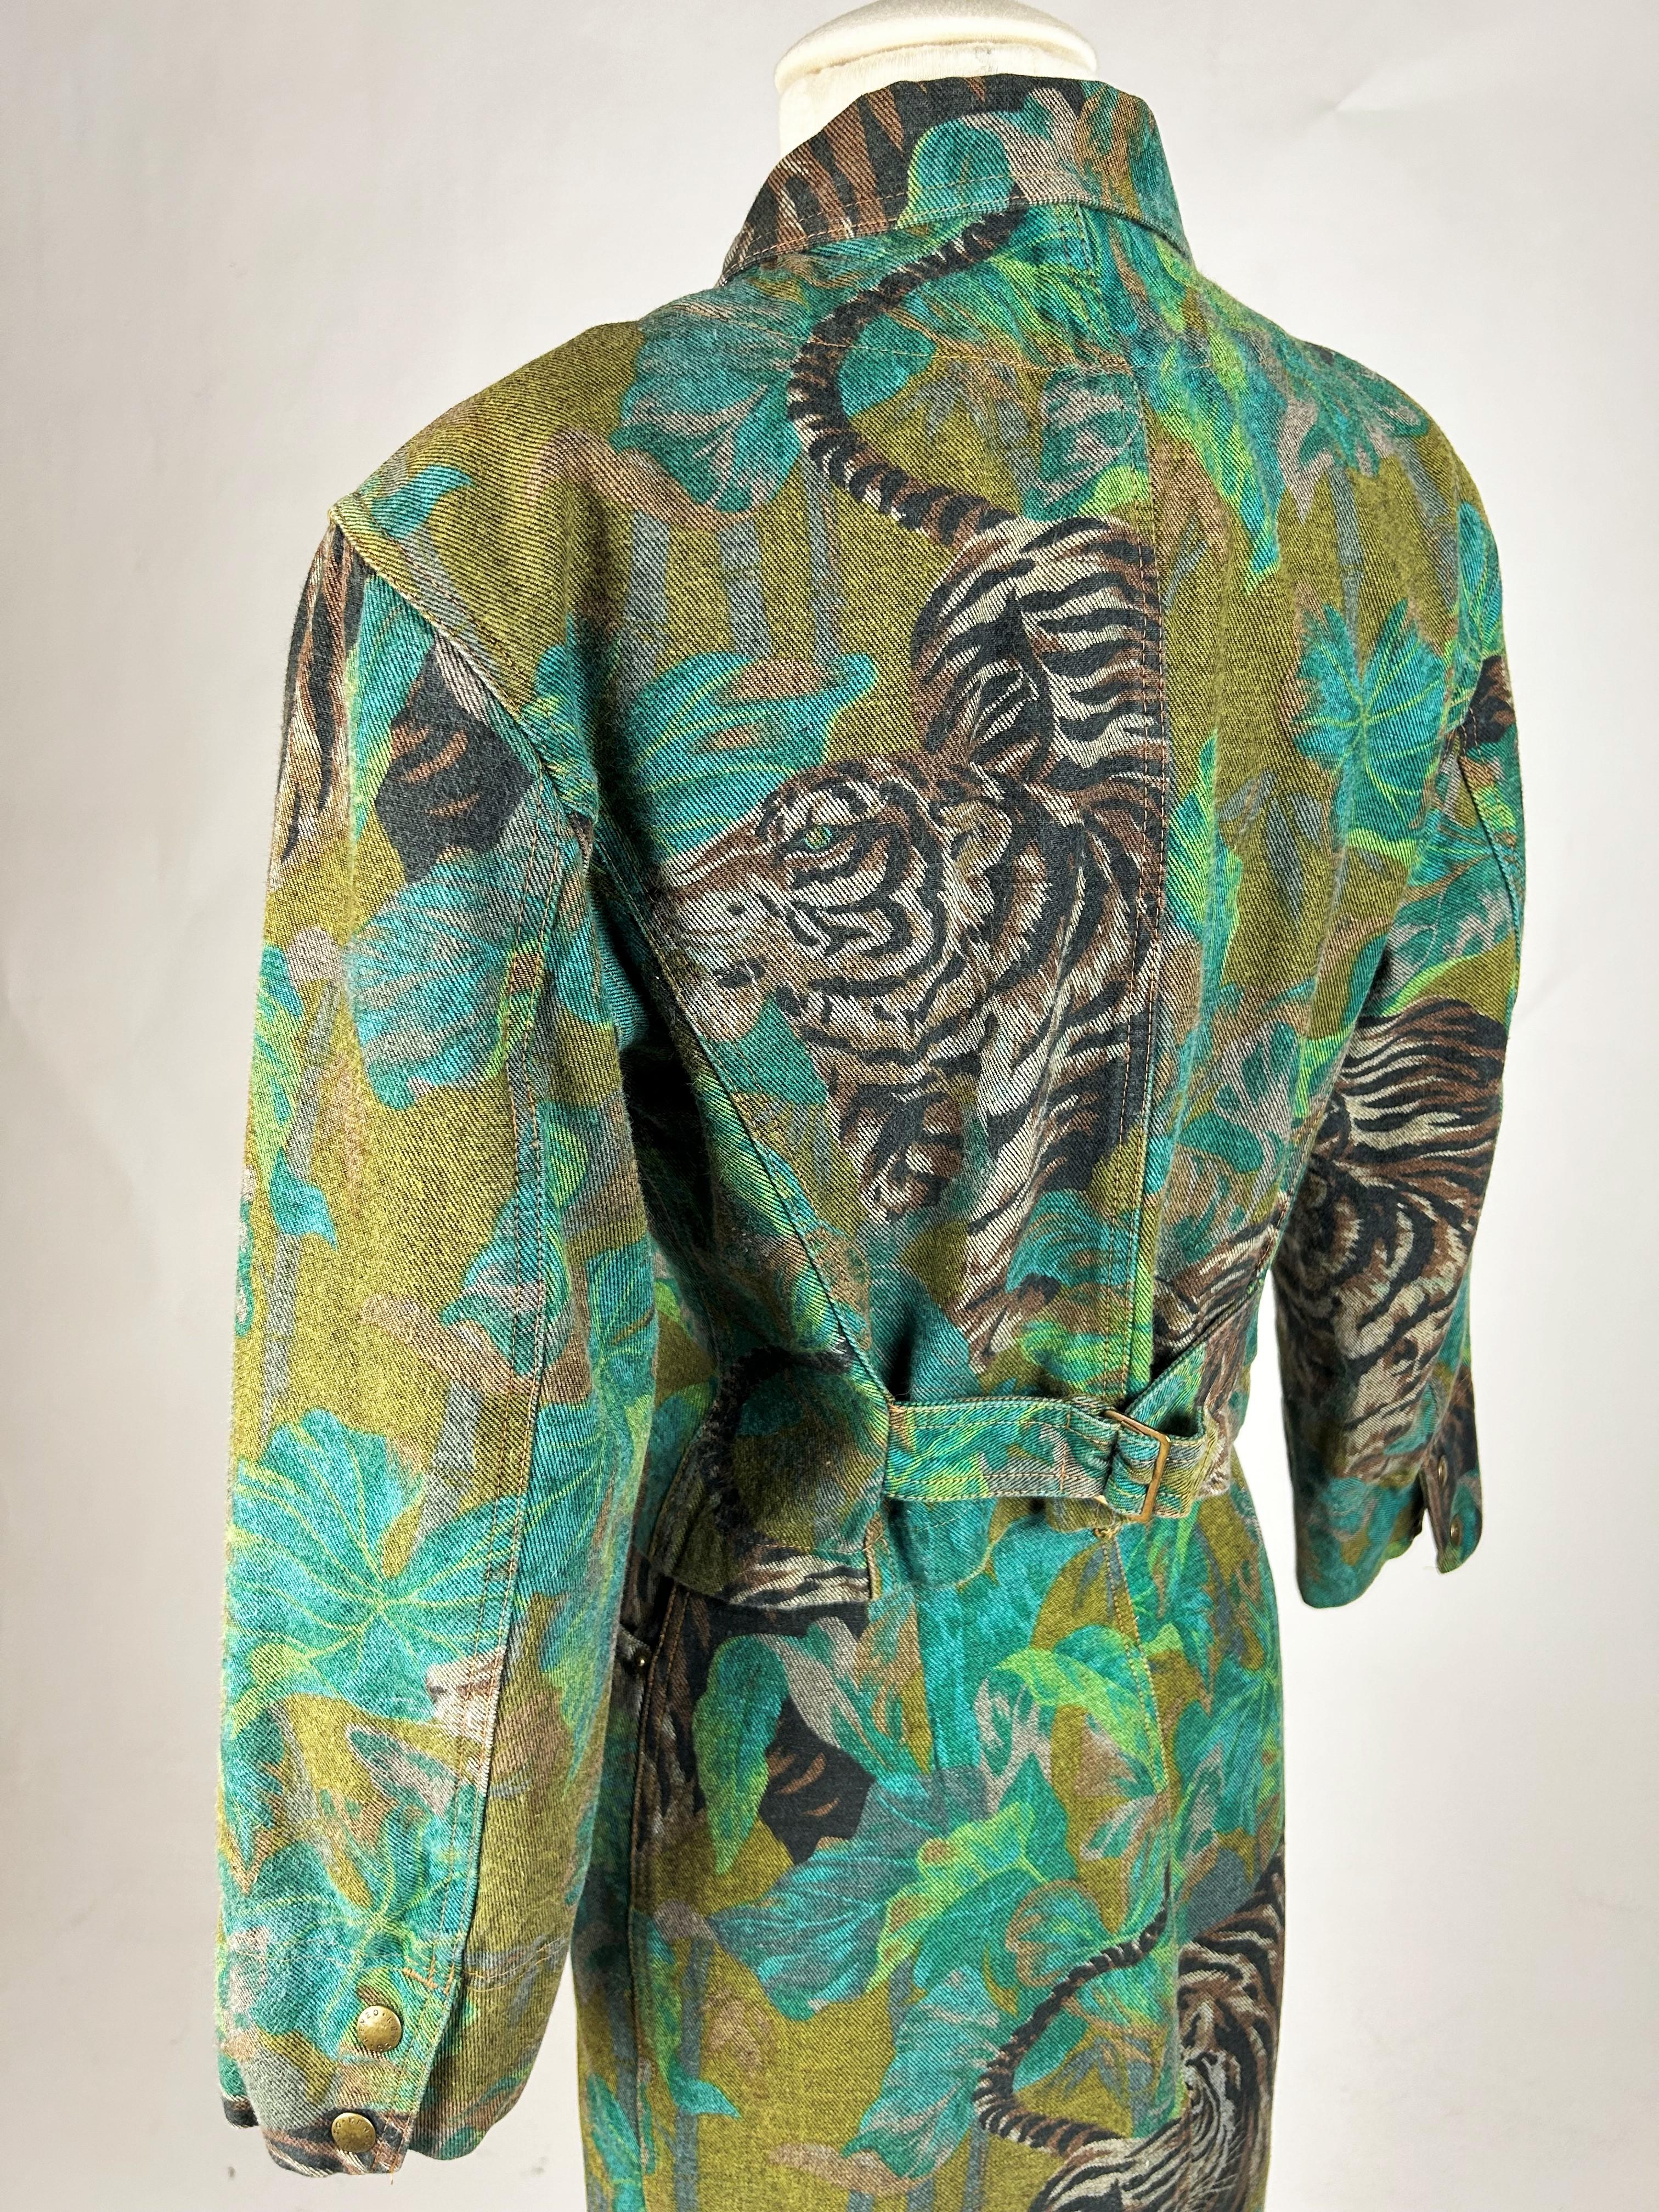 Jacket and Skirt by Kenzo Takada, Jungle & Tiger Print on Denim - French C. 1990 For Sale 8